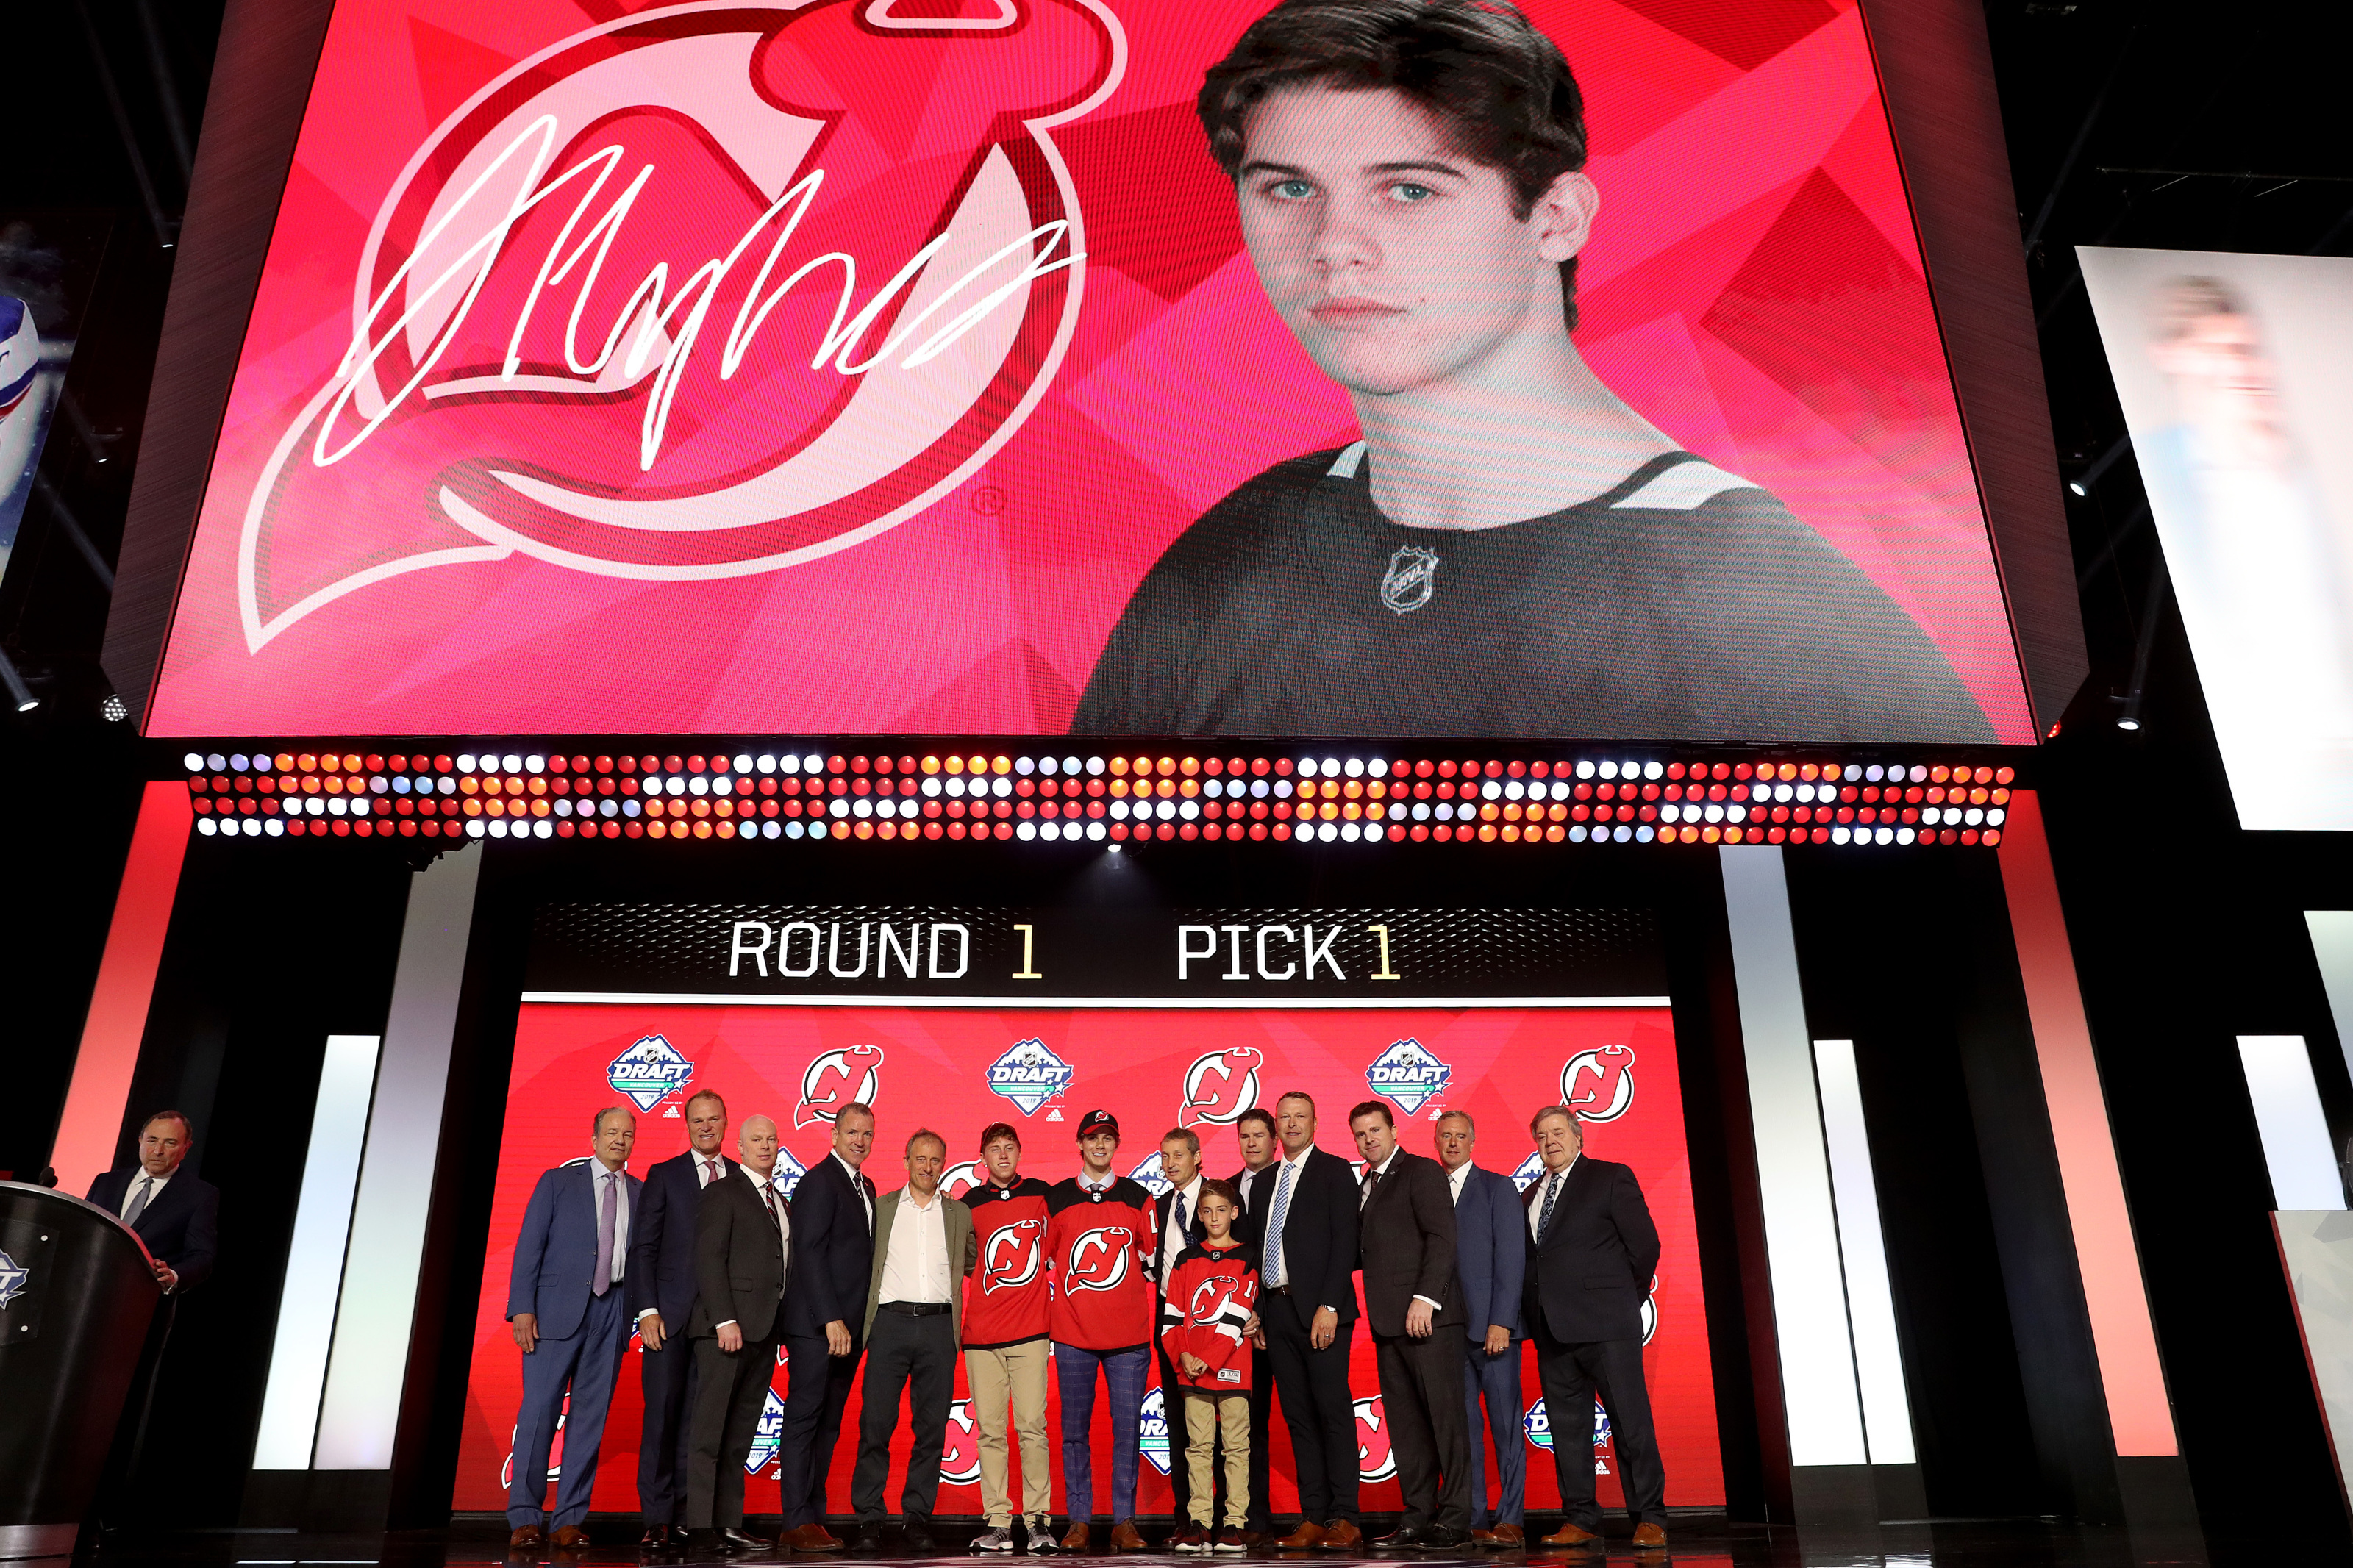 No, the New Jersey Devils didn't land the wrong Hughes brother